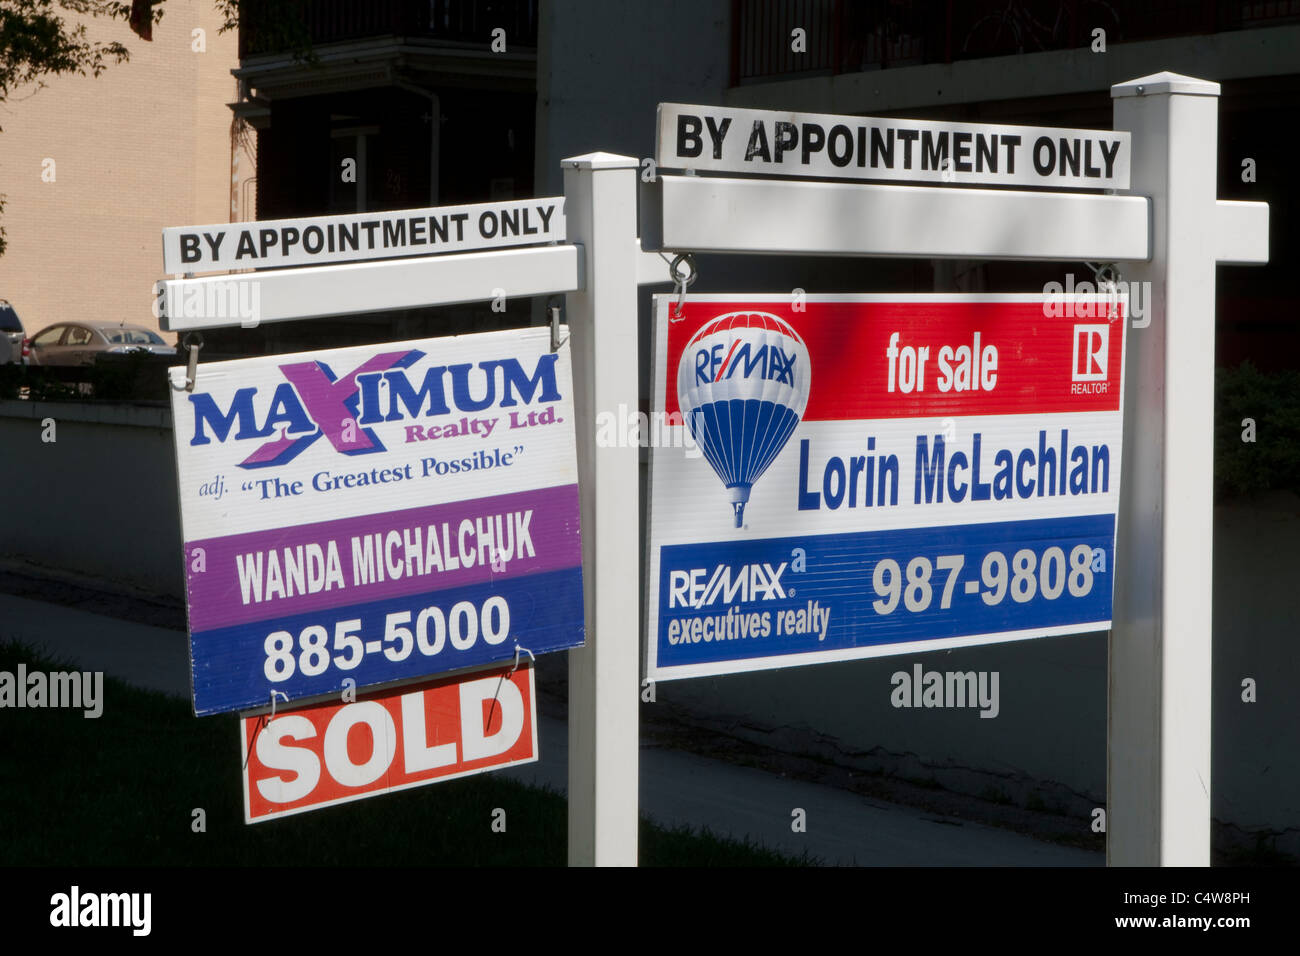 'For sale' signs for Maximum realty and Re/Max are seen next to each other in Winnipeg Thursday May 26, 2011. Stock Photo